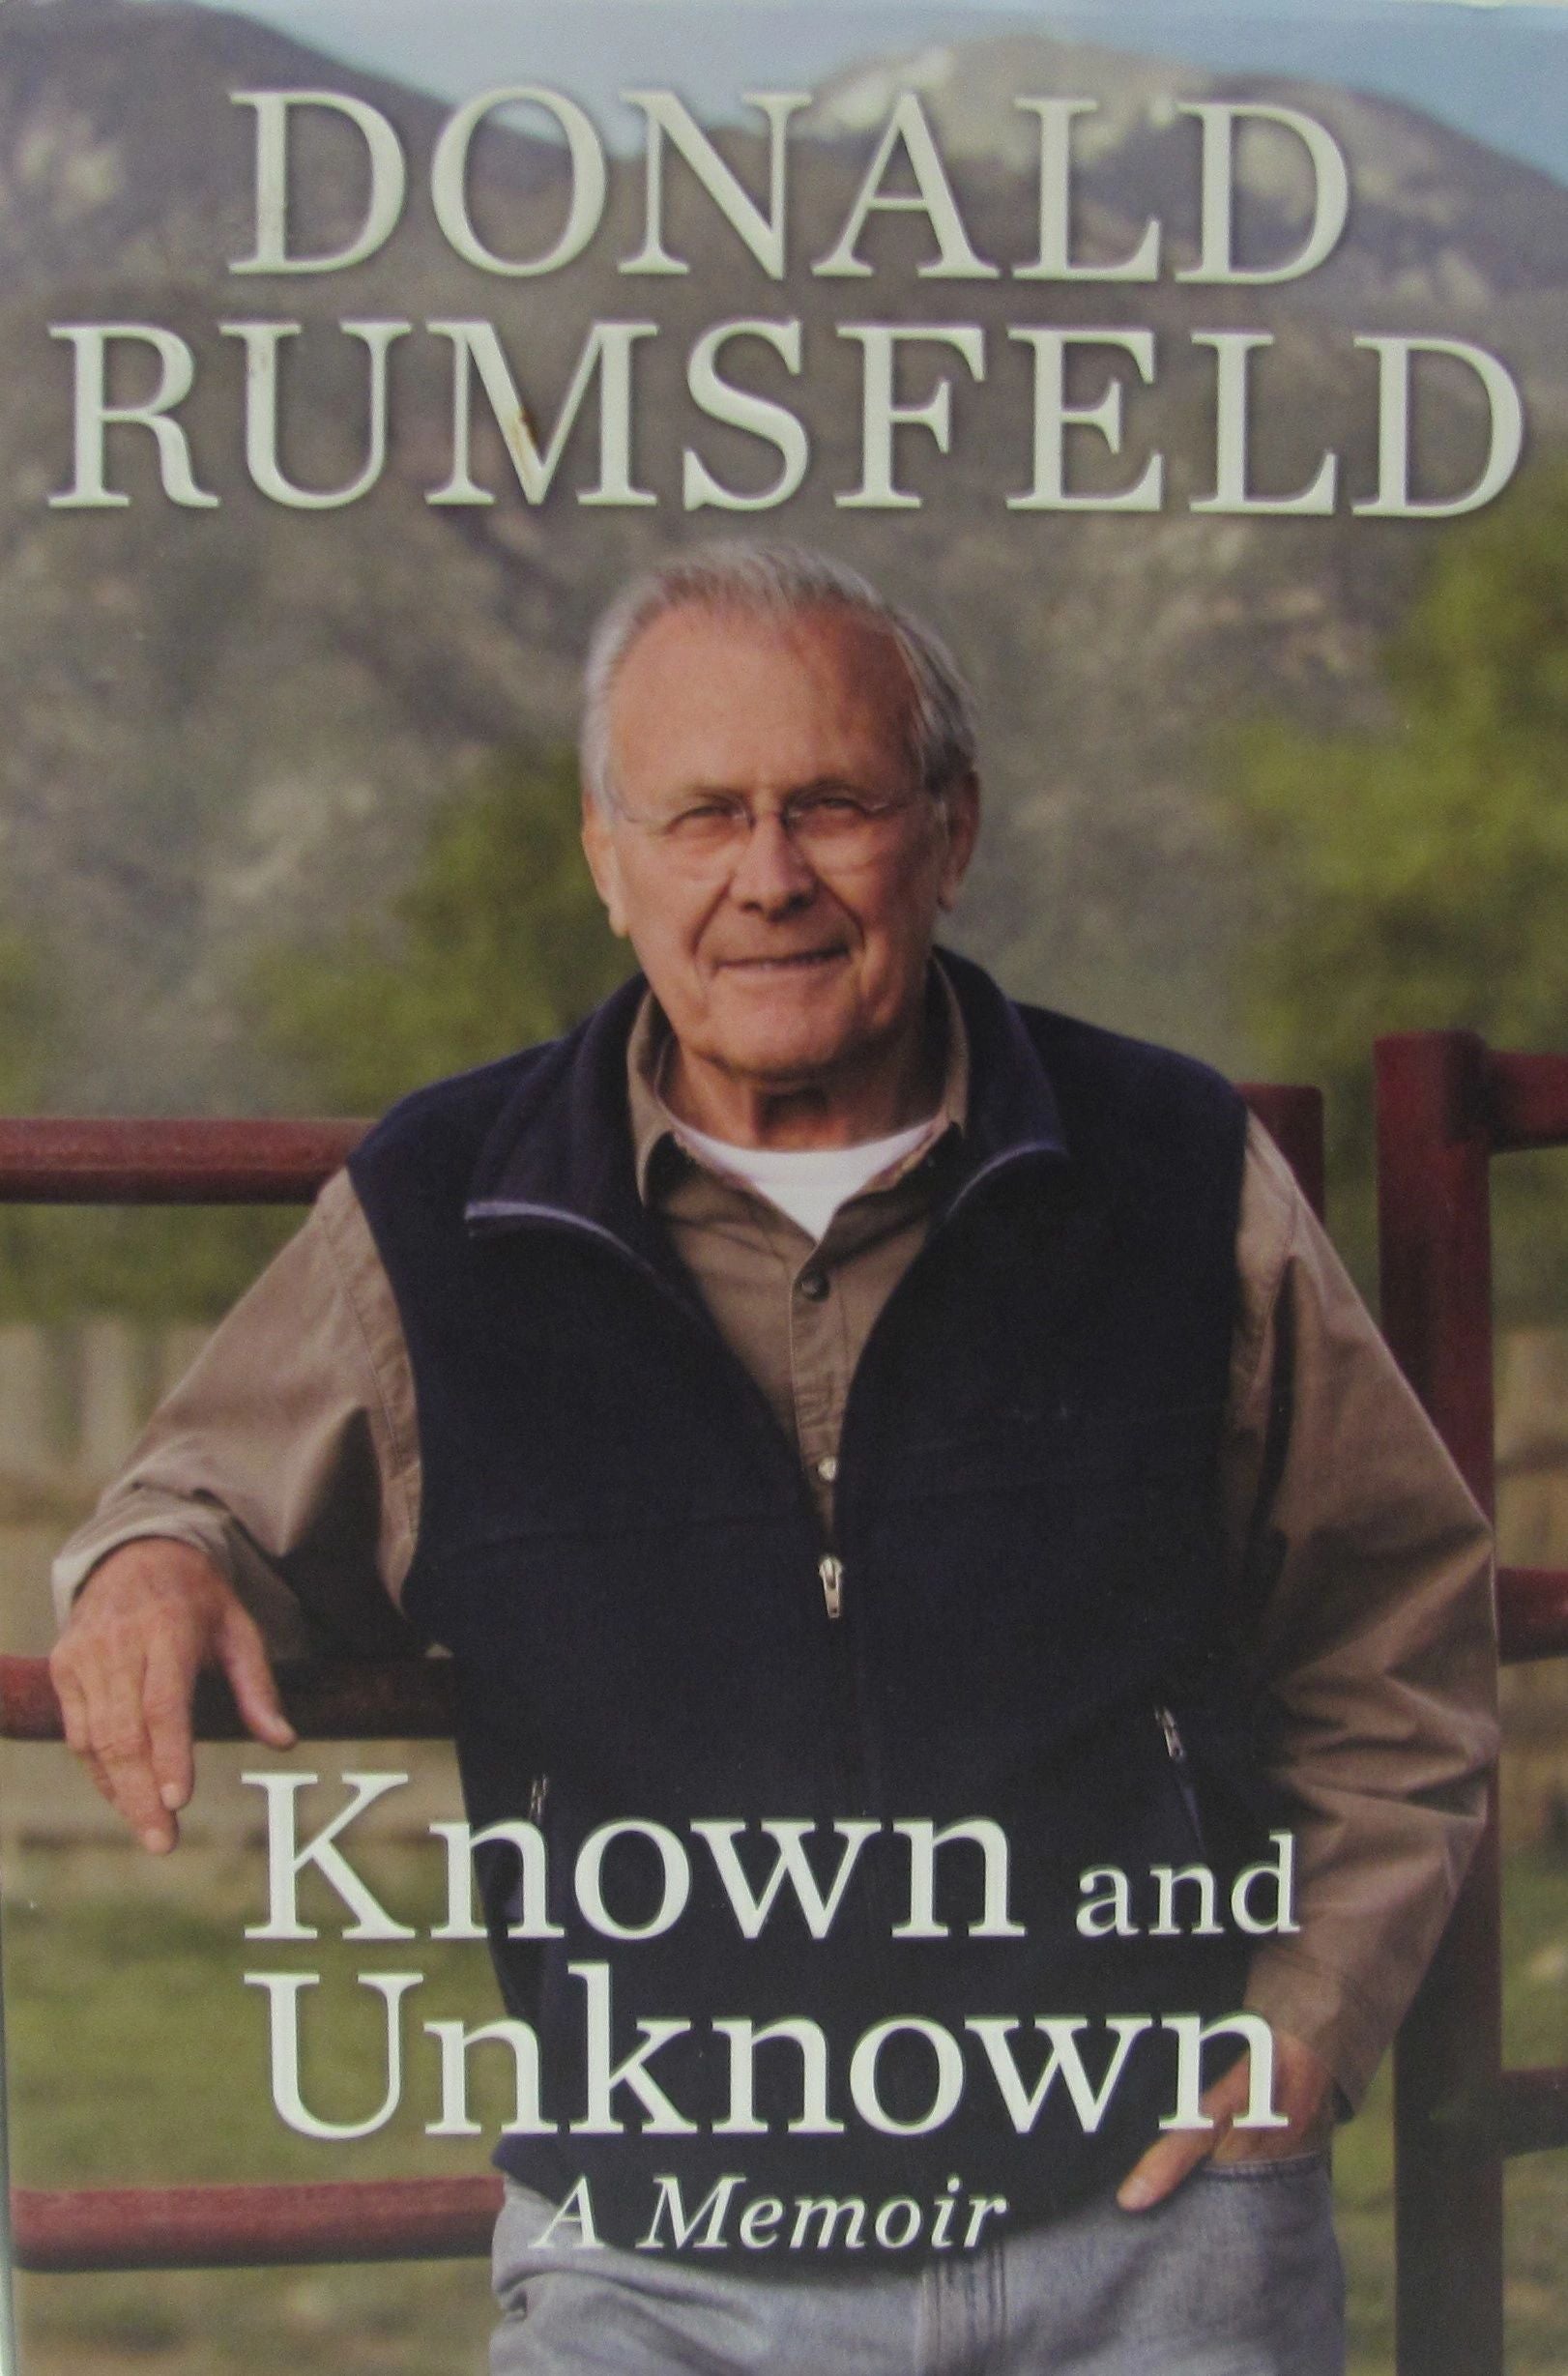 Rumsfeld, Donald Known and Unknown / A Memoir (SIGNED) W/JSA COA